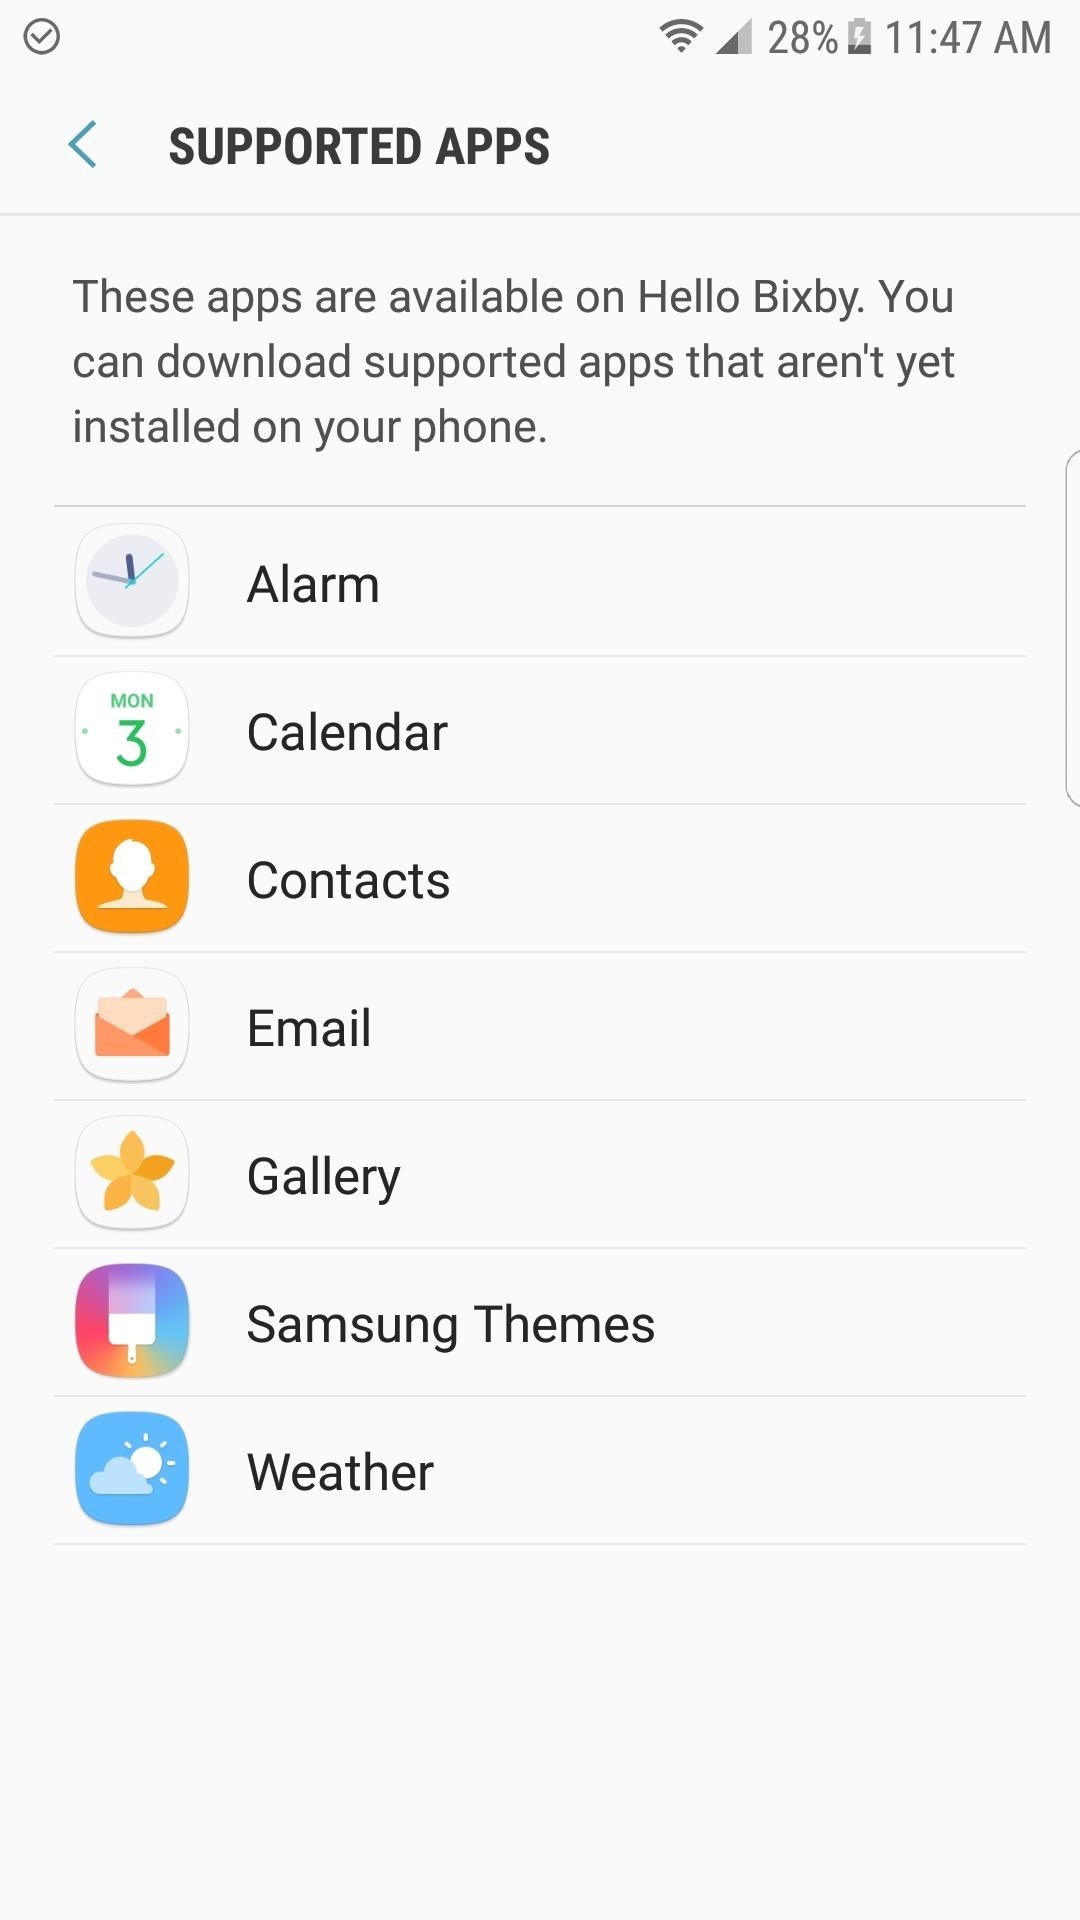 Add the Galaxy S8's New Bixby Feed to Your S7 or S7 Edge's Home Screen